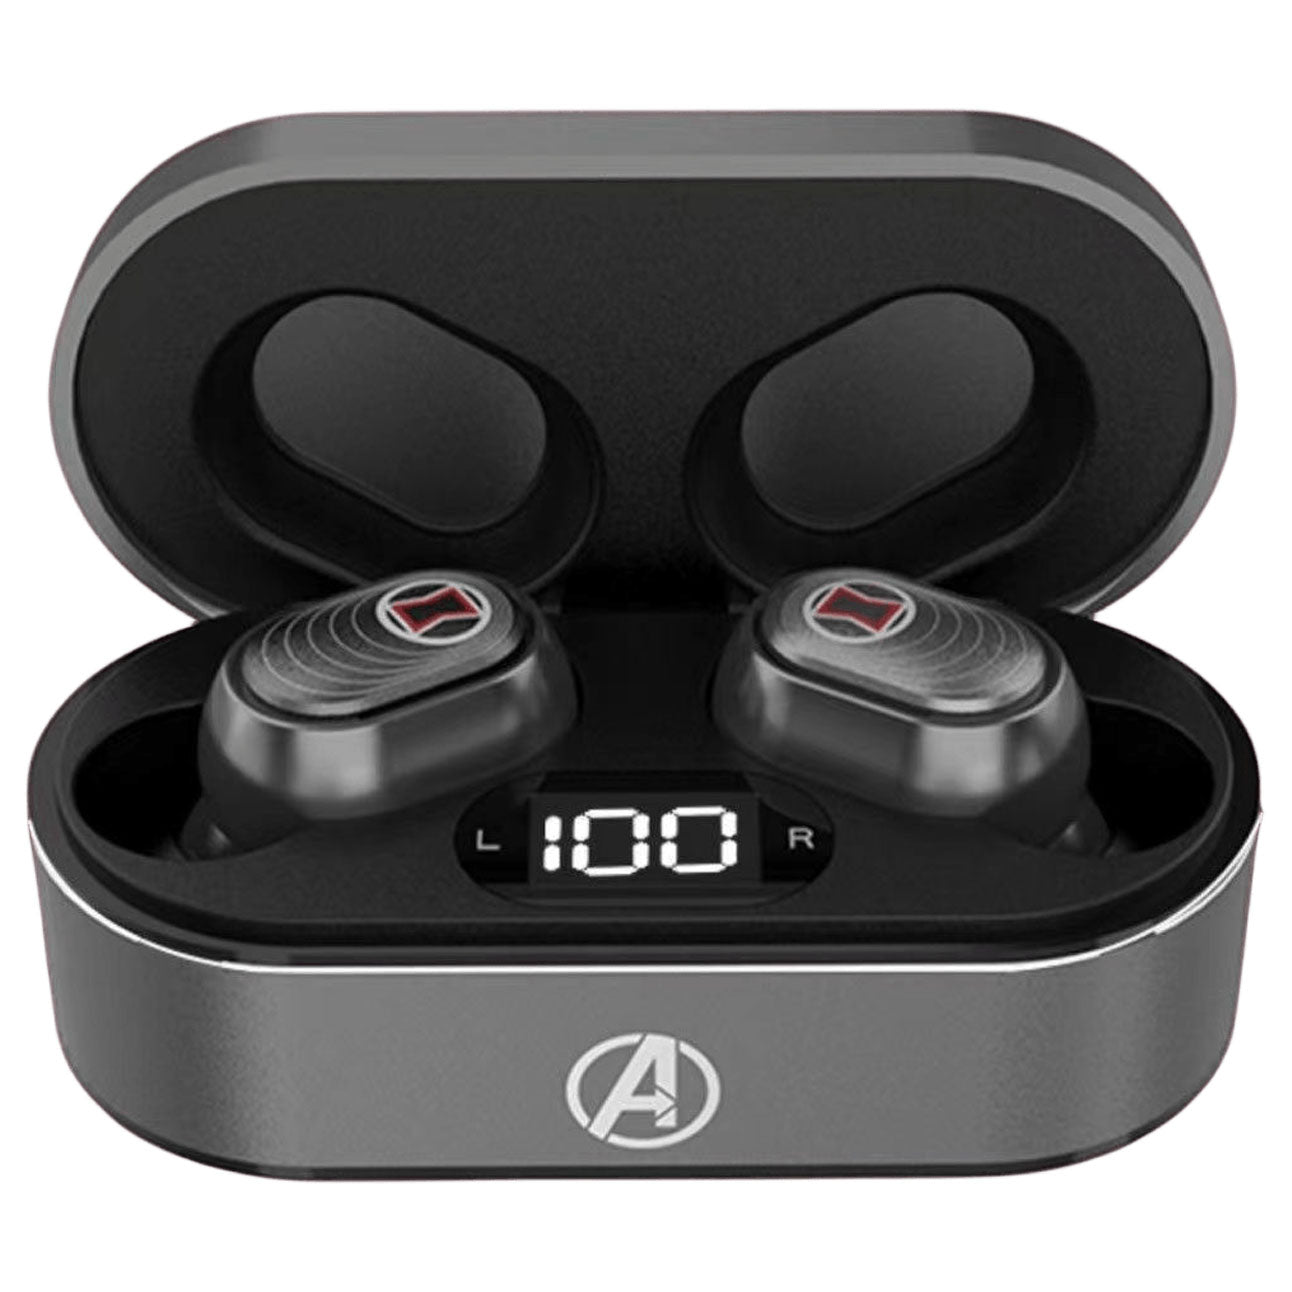 IRON MAN/STEVE ROGERS/BLACK PANTHER MOBILE PHONE WIRELESS BLUETOOTH APPLE ANDROID UNIVERSAL ACTIVE NOISE REDUCTION HD SOUND QUALITY HEADSET EARPHONES